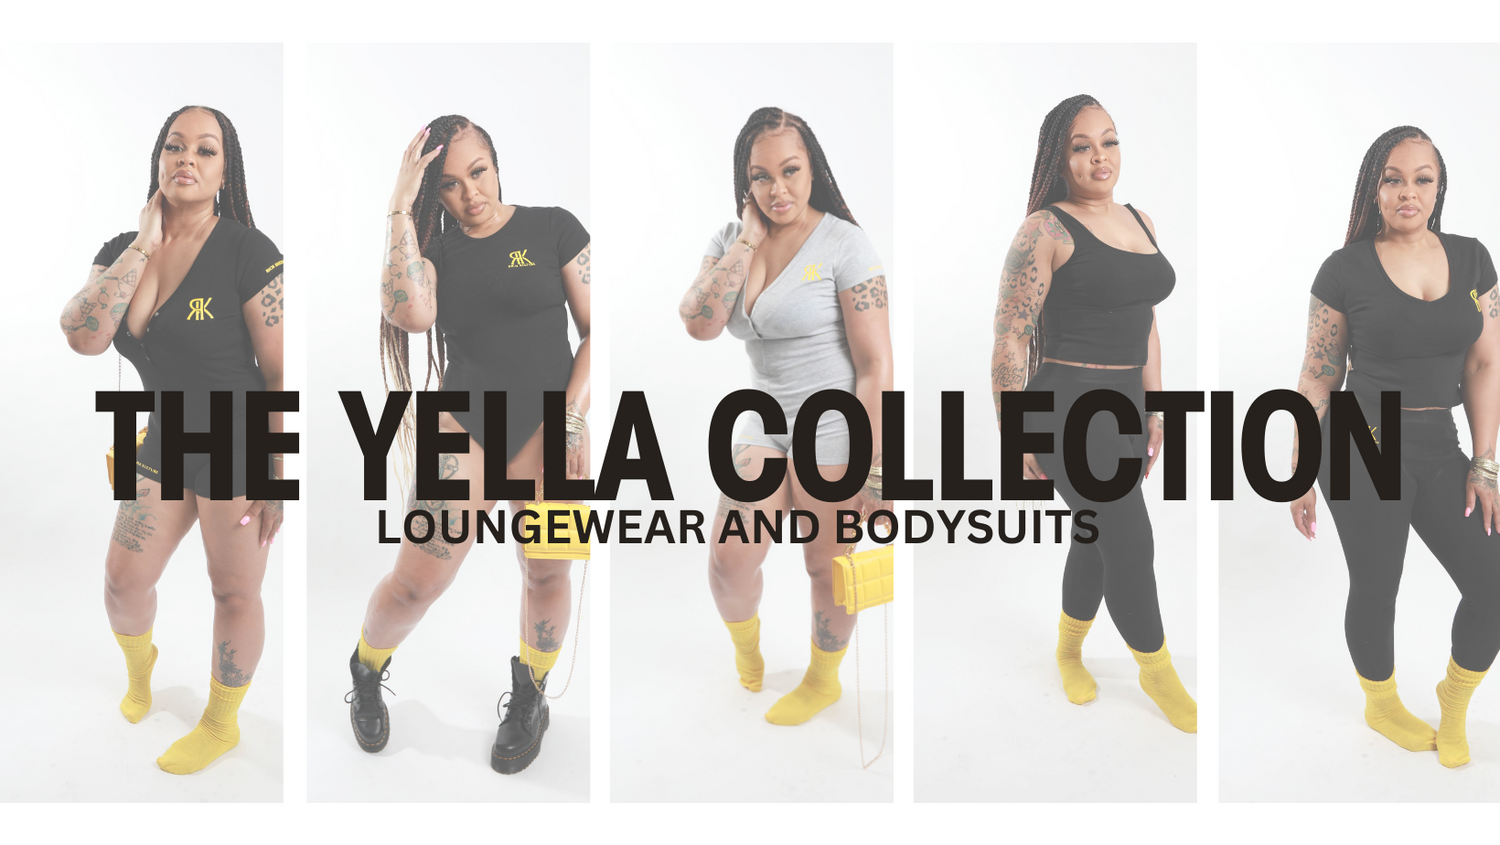 The Yella Collection